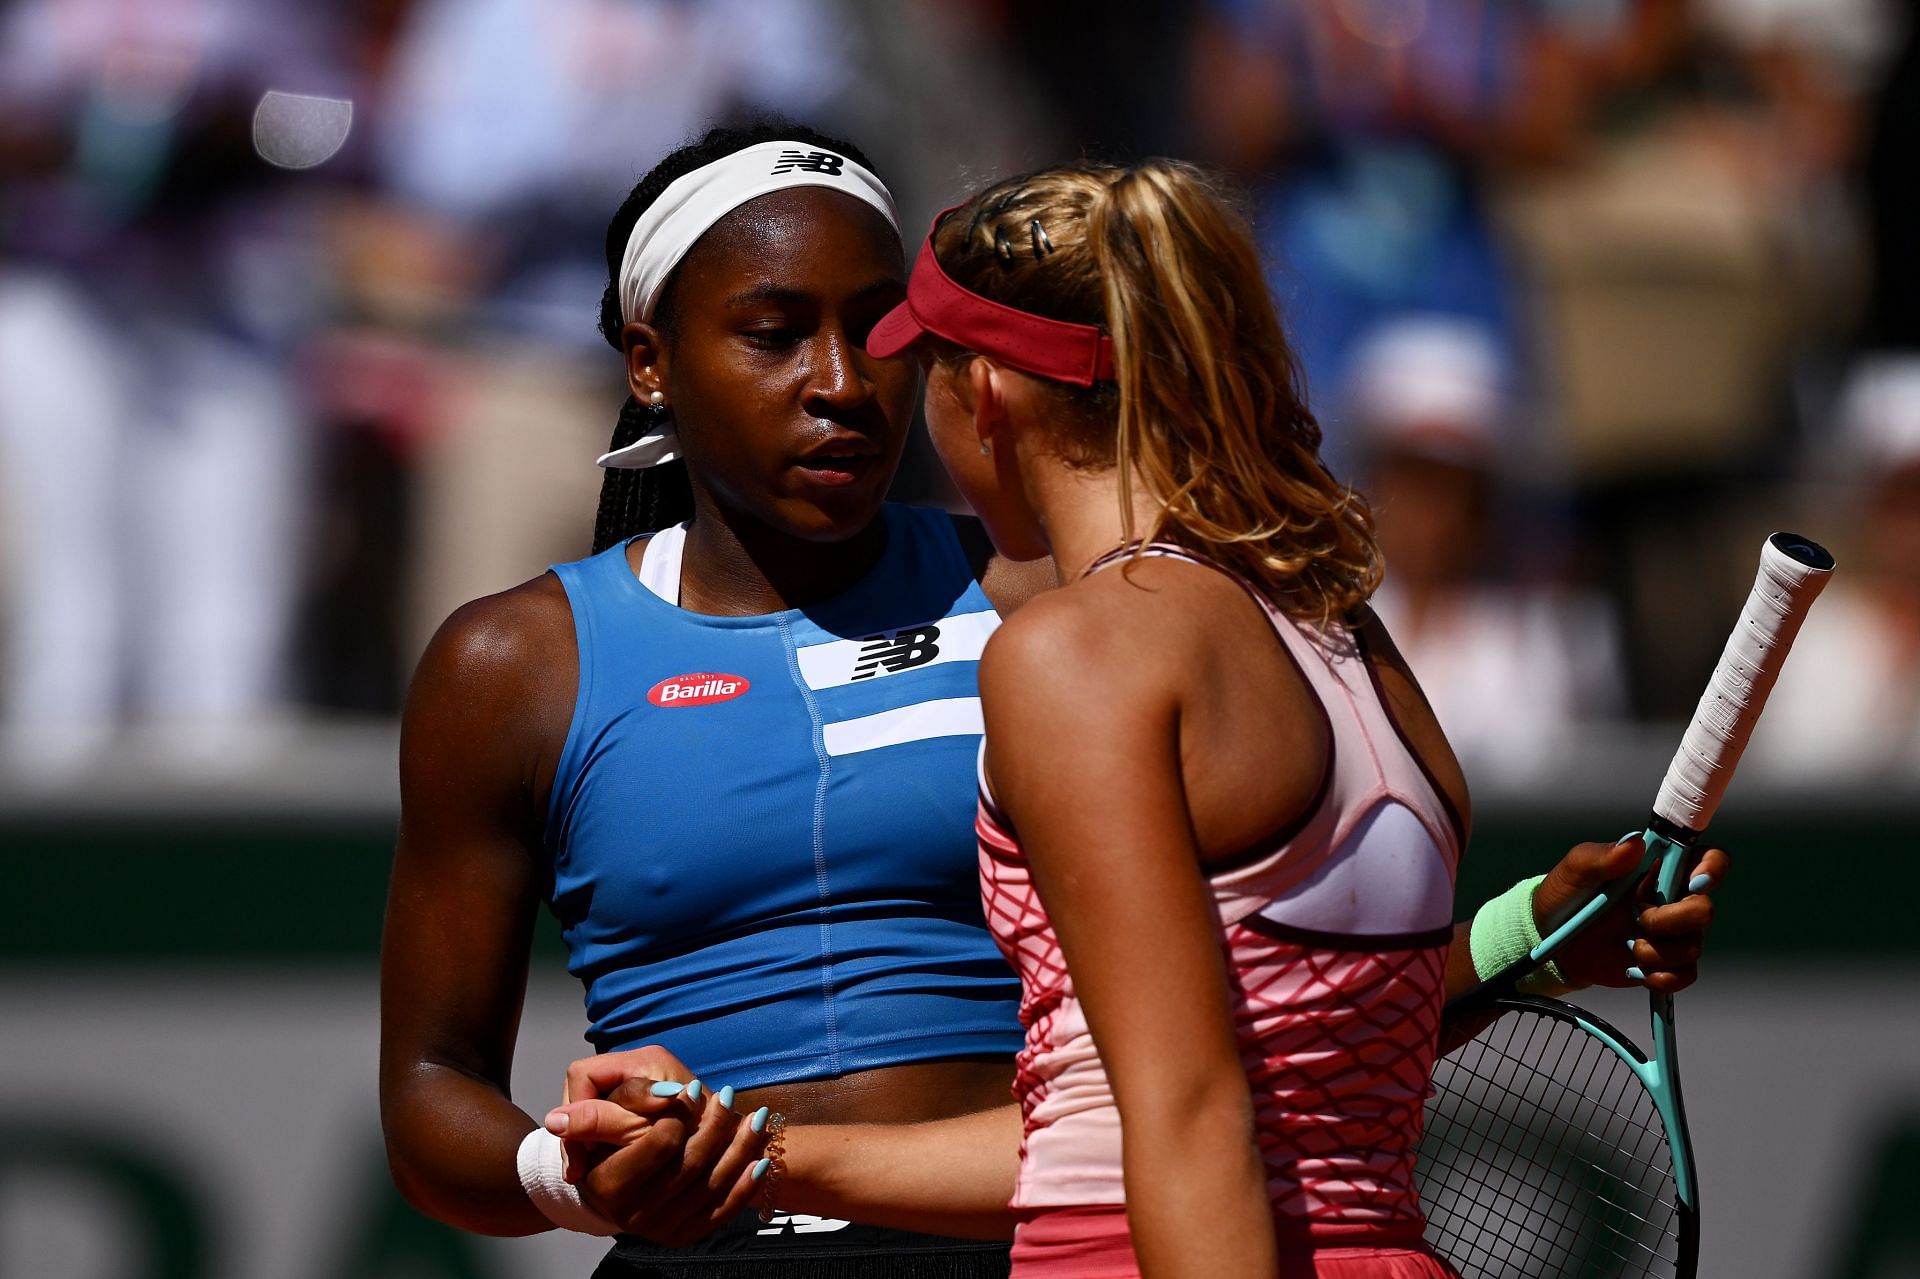 "I don't regret talking the way I did" Coco Gauff reflects on